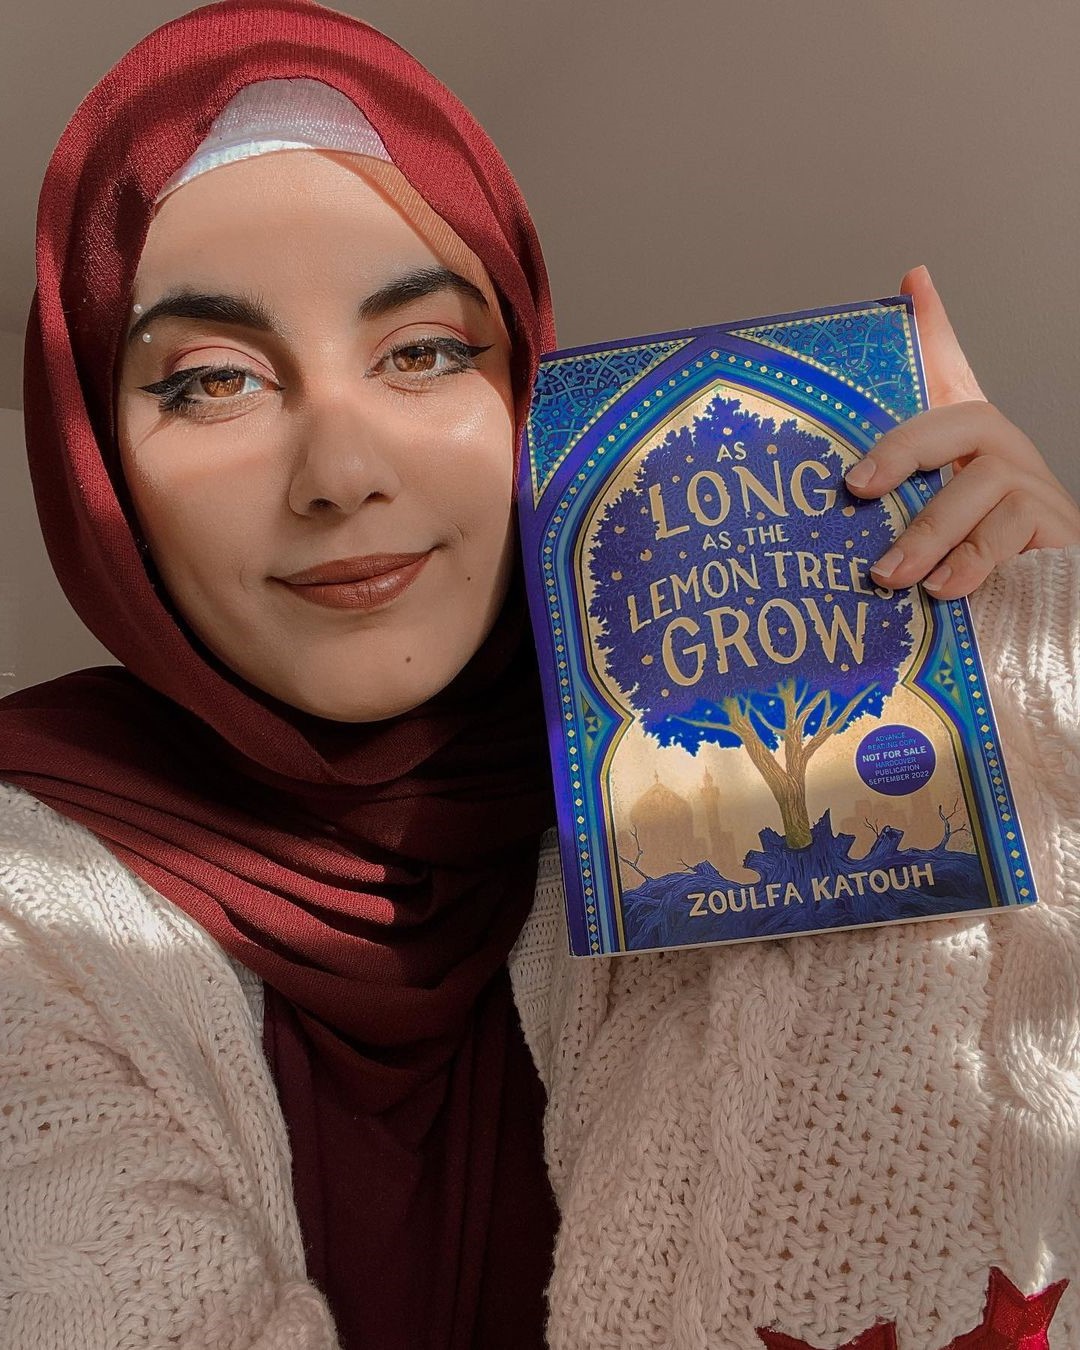 Portrait of Zoulfa Katough posing with the book "As Long As the Lemon Trees Grow". She is a young woman in a red hijab with pointed eyeliner.